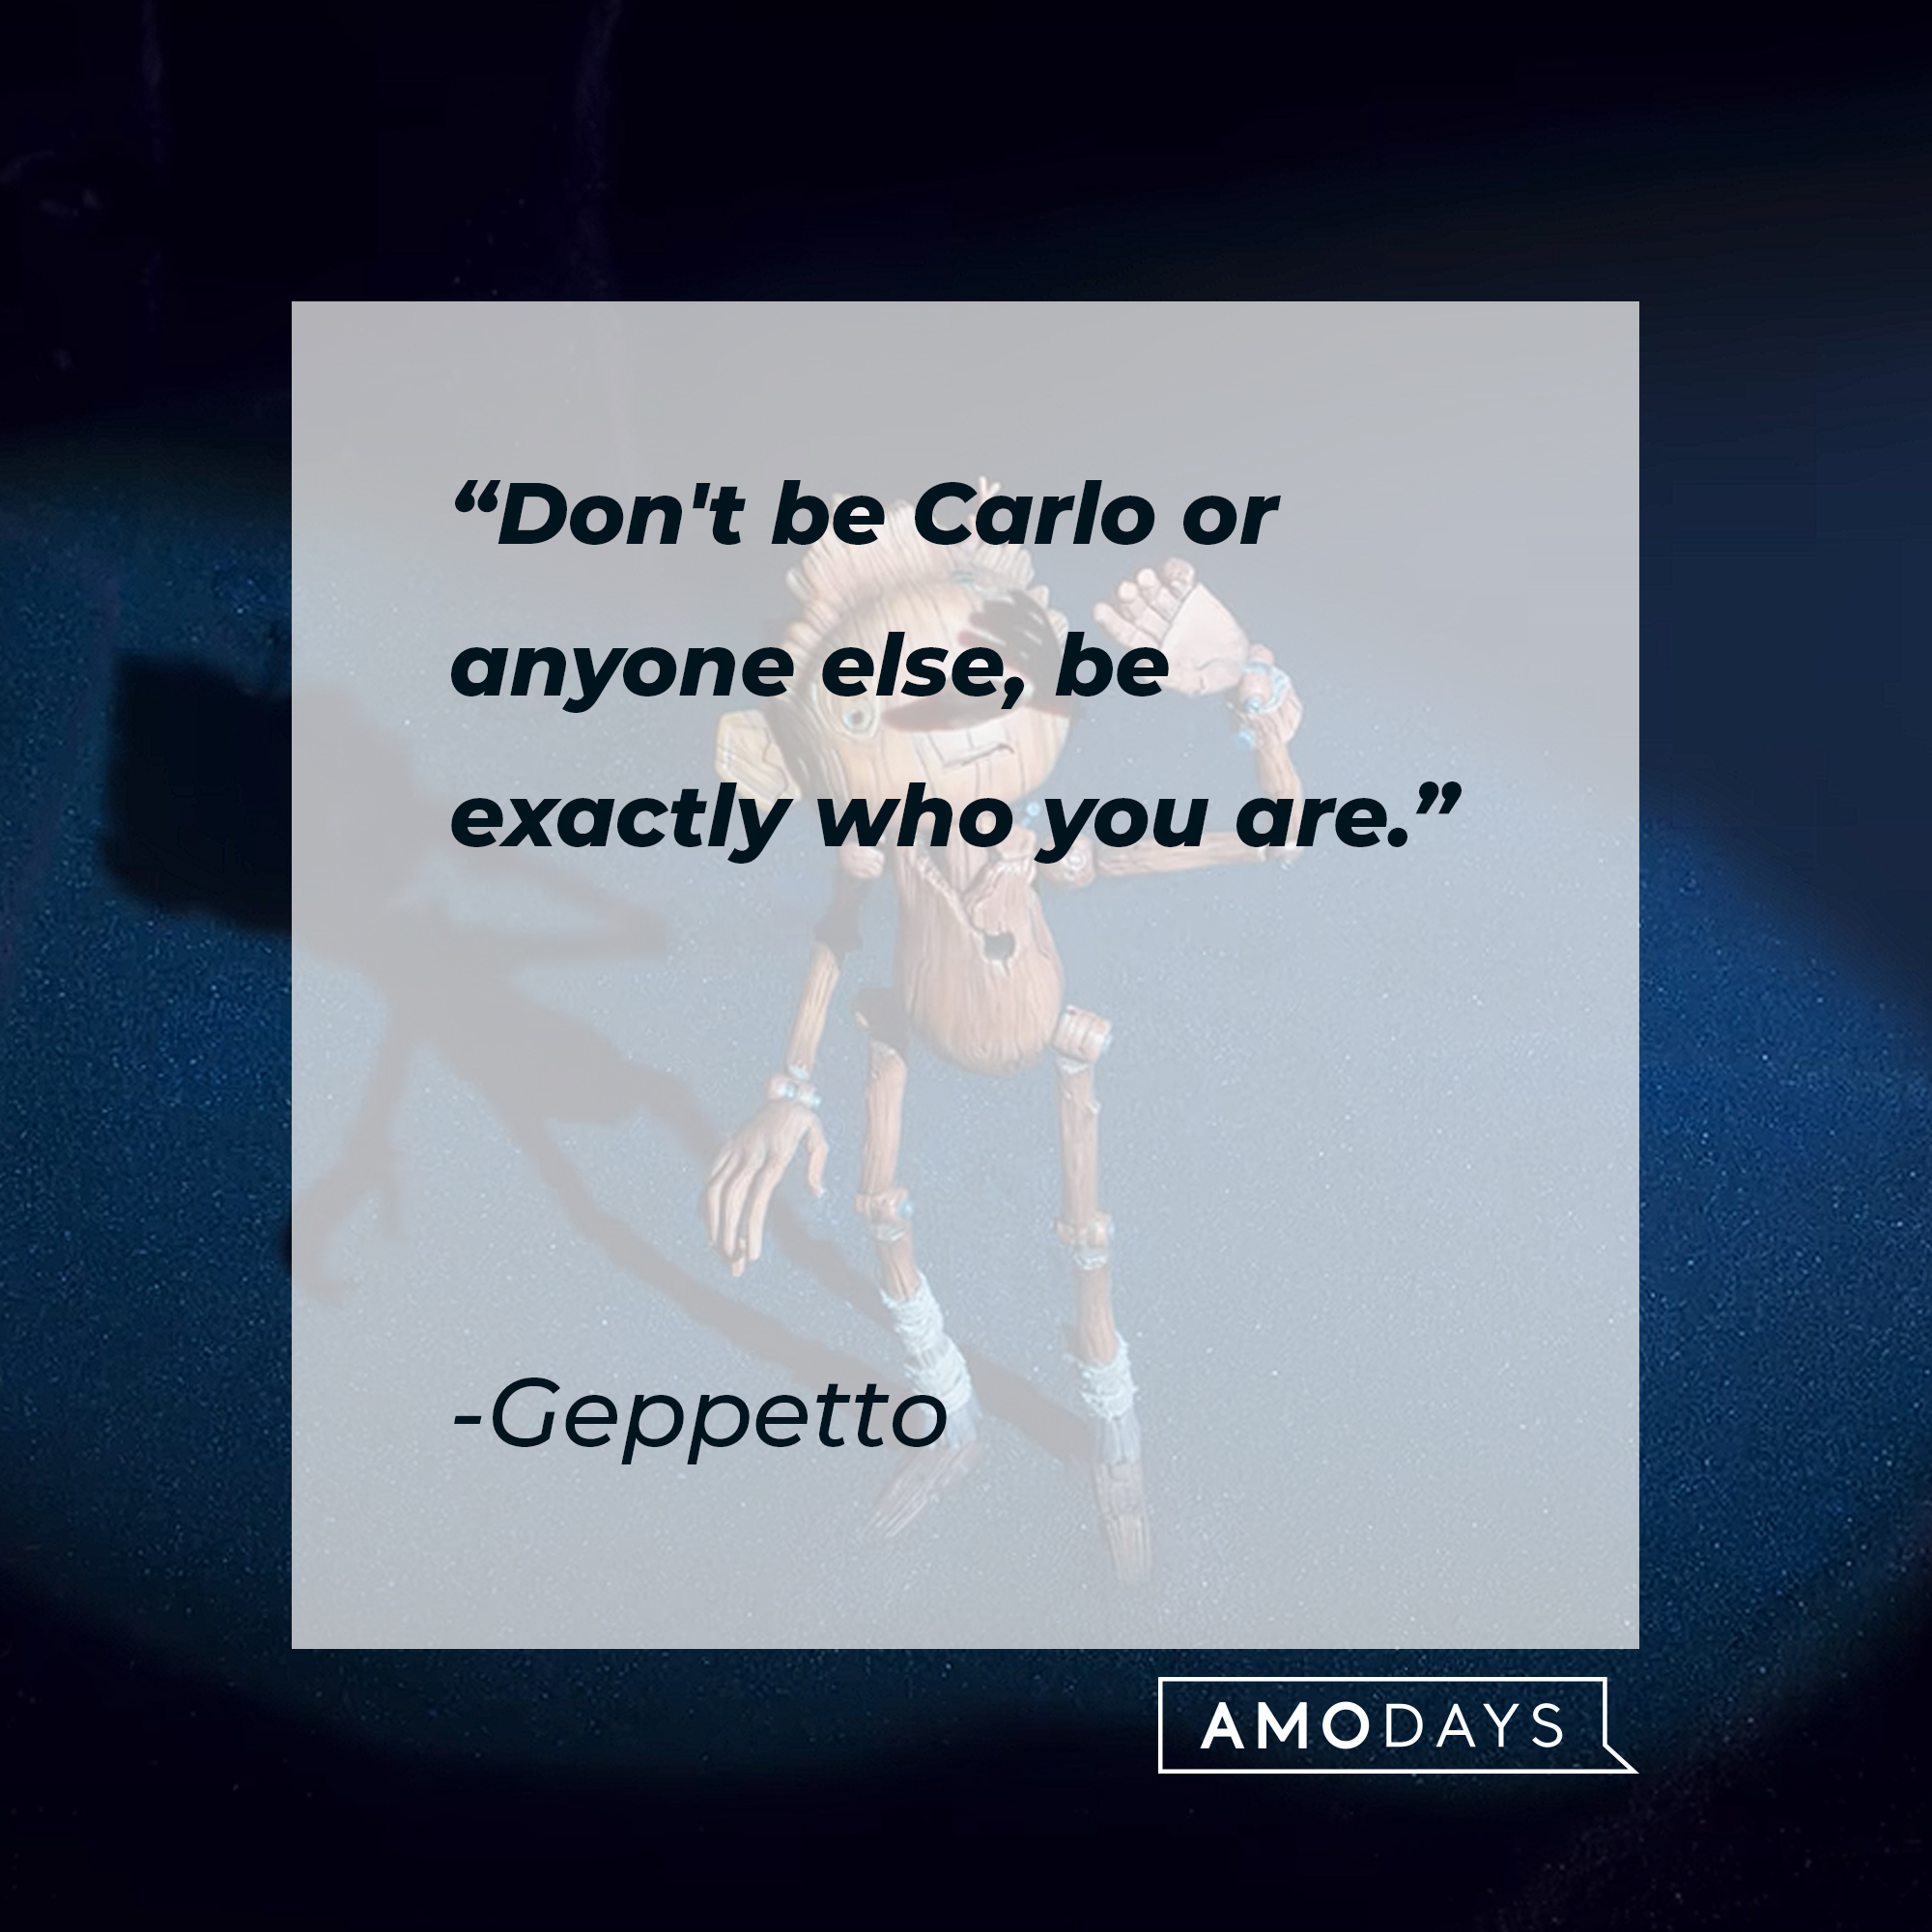 Geppetto's quote: "Don't be Carlo or anyone else, be exactly who you are." | Image: AmoDays